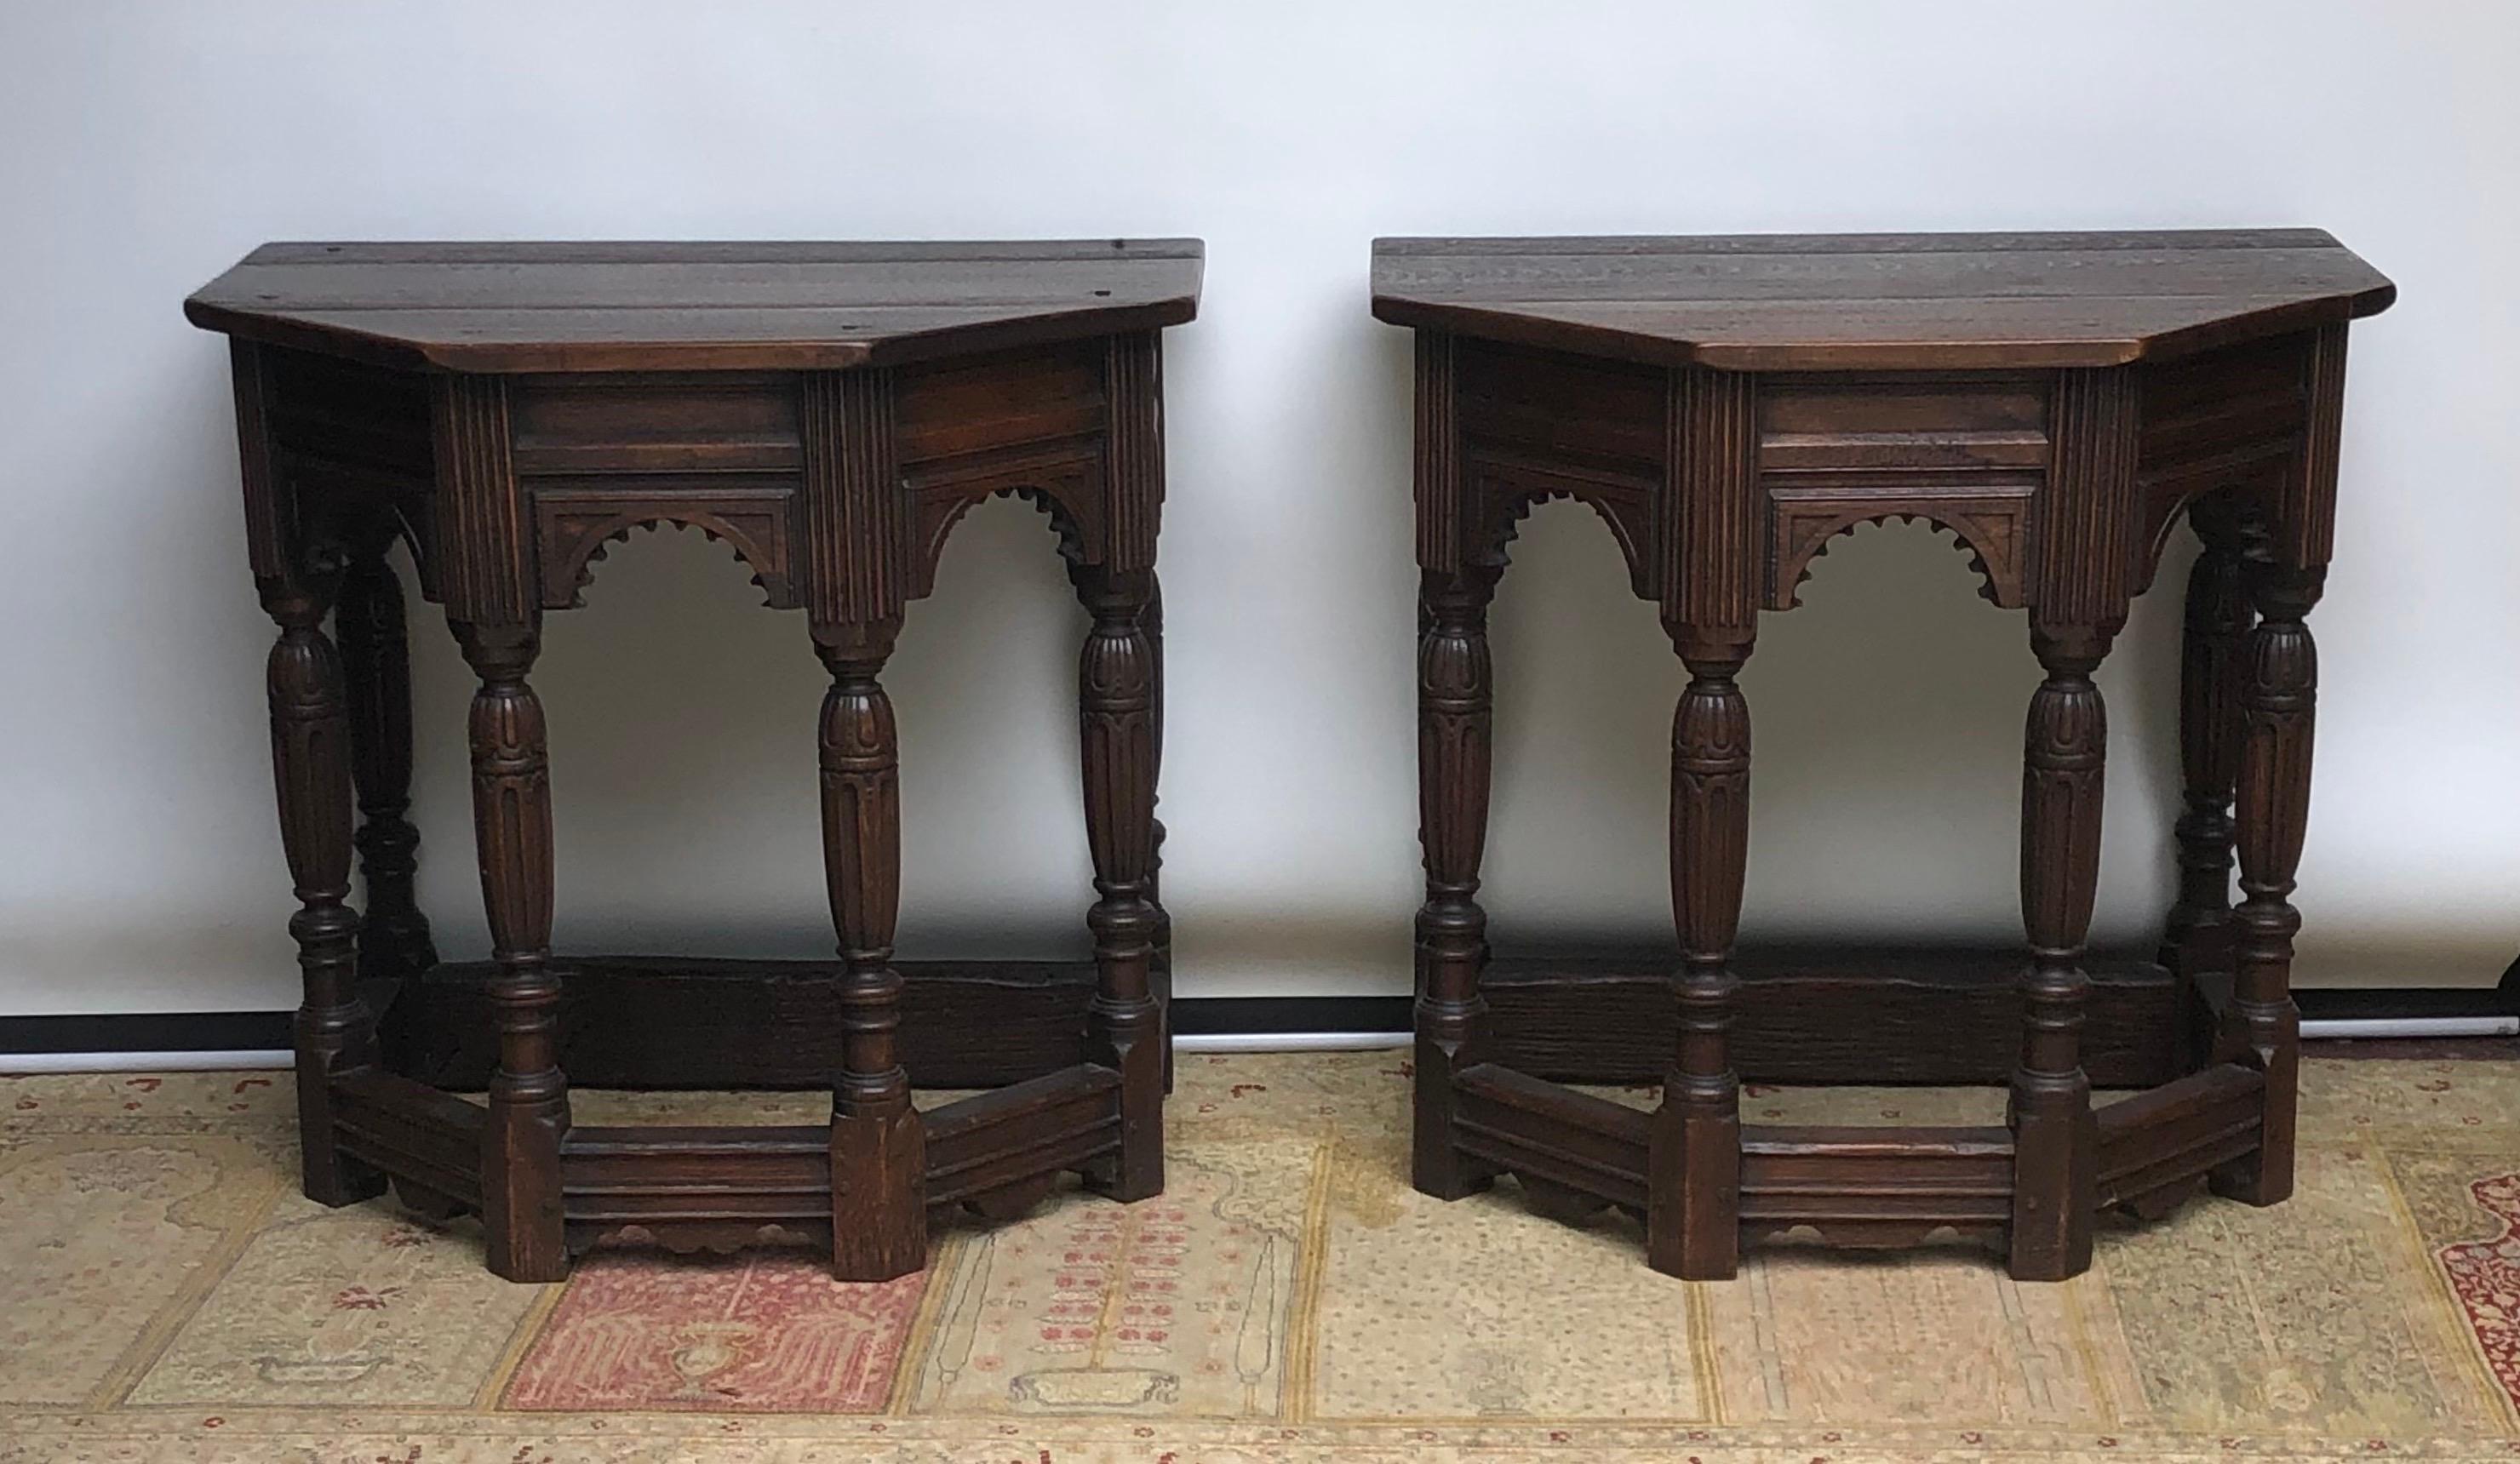 This Pair of English solid Oak Elizabethan Style Console / Side Tables are Renaissance Revival Period. The Elizabethan Style Console Tables have one inch thick solid oak plank tops attached with handmade rose-head nails. The Renaissance Revival oak